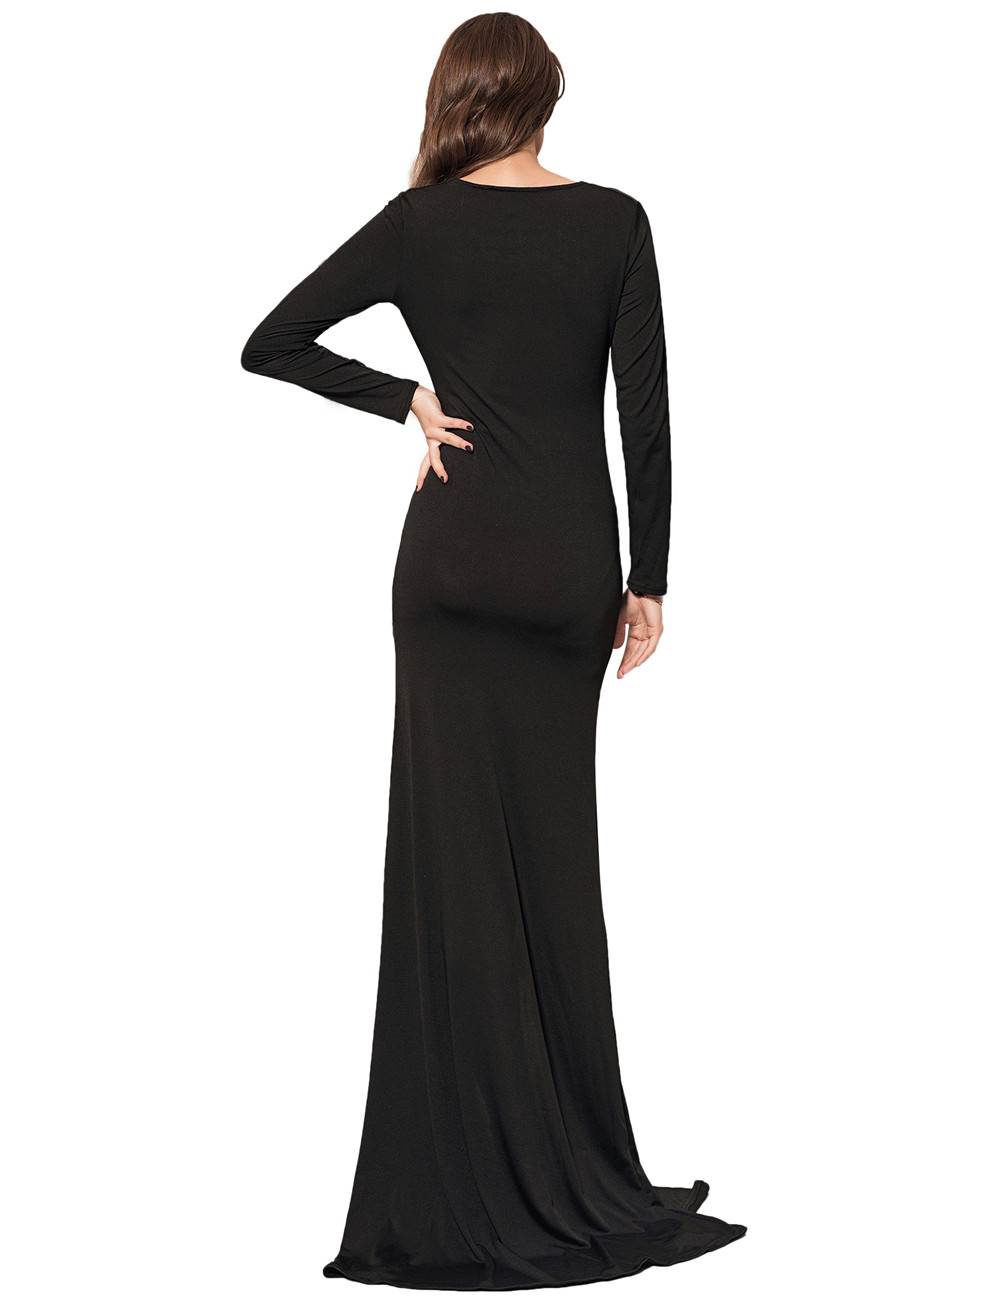 Cheap Sexy Long Sleeve Black Lace Trim Party Gown